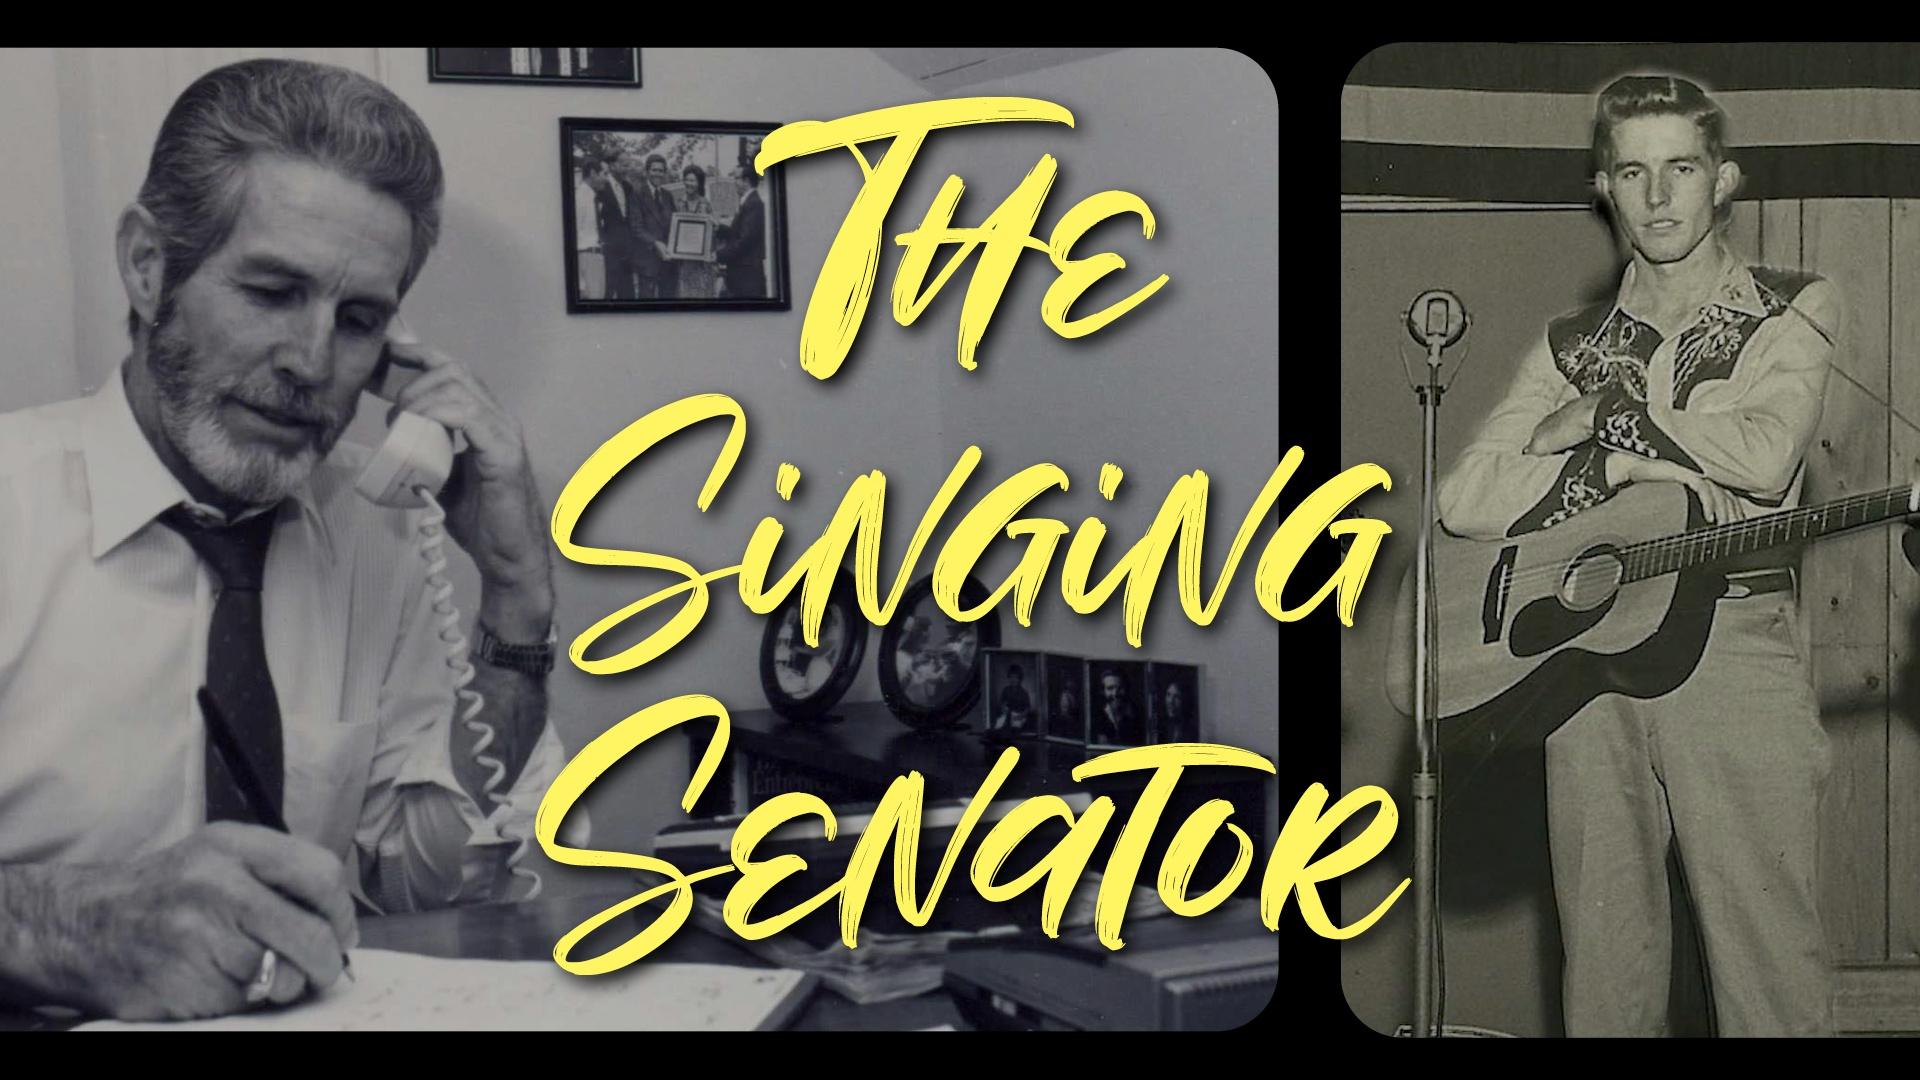 "The Singing Senator" in a yellow glowing font.